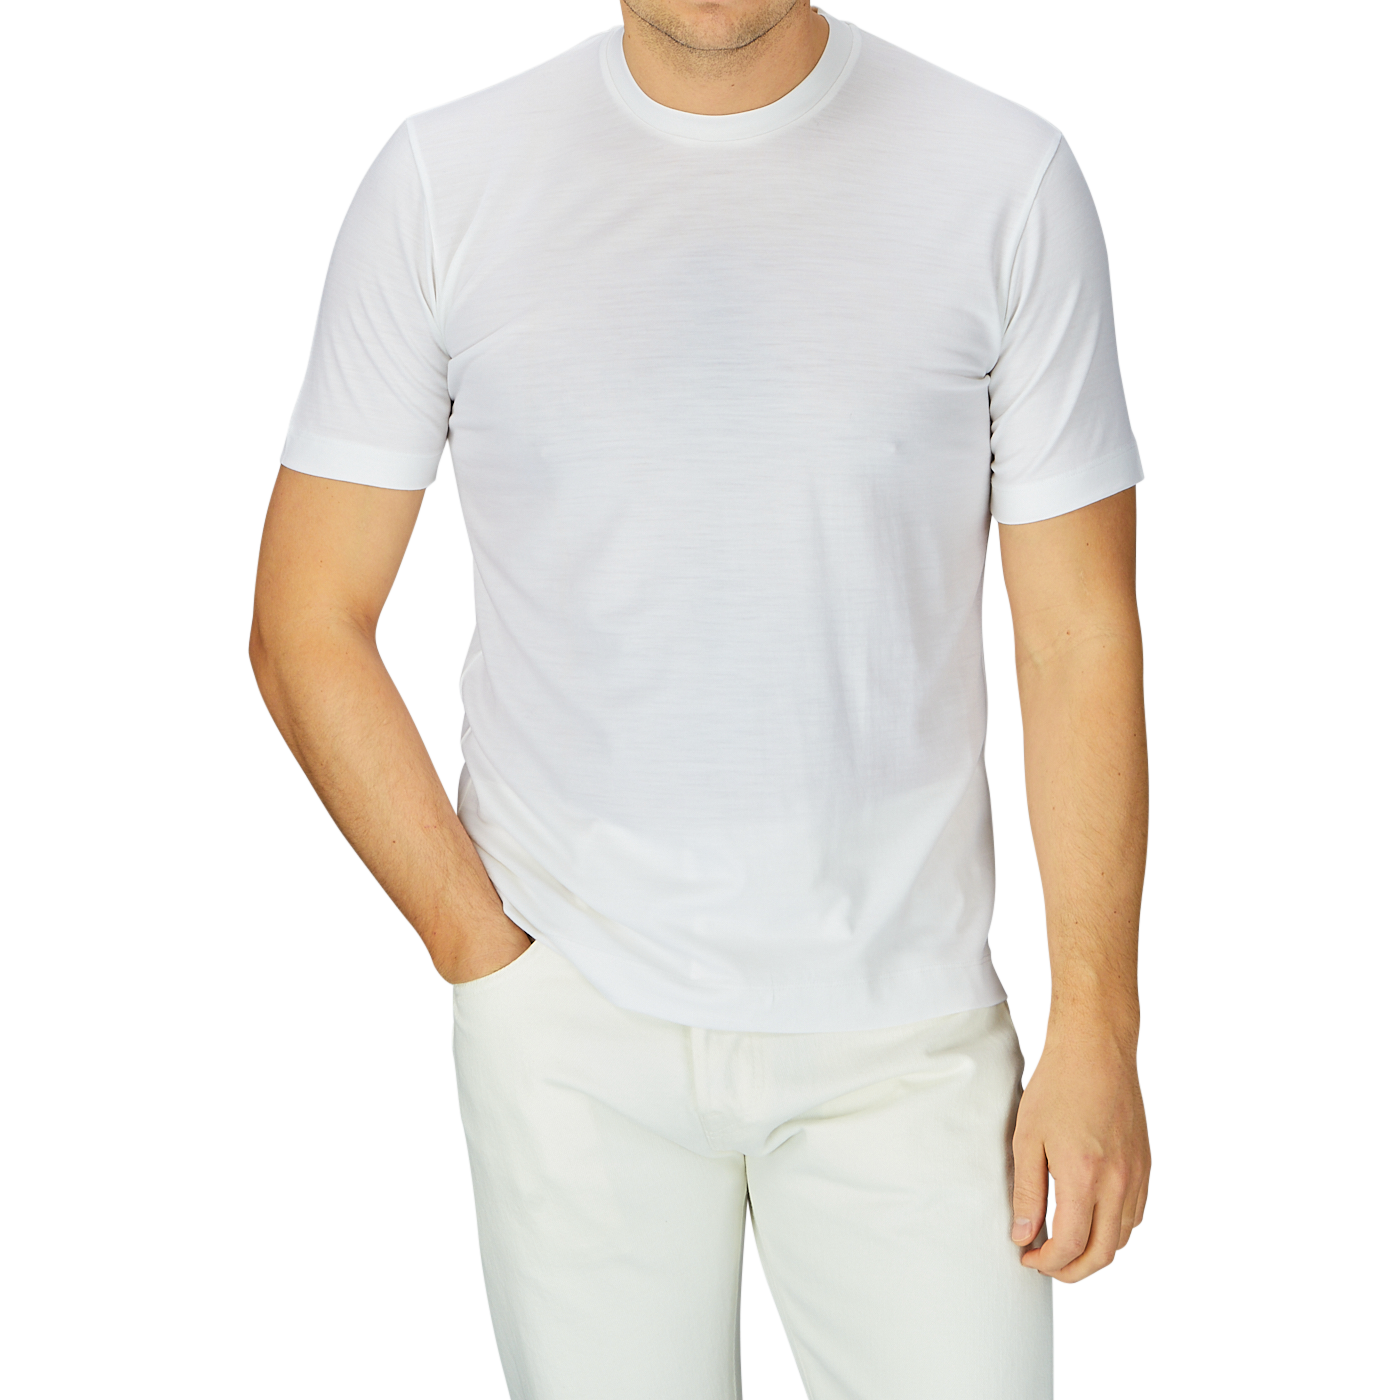 Man in a breathable Off-White Merino Wool T-shirt from Mazzarelli and light beige pants, standing with one hand partially in his pocket against a grey background.